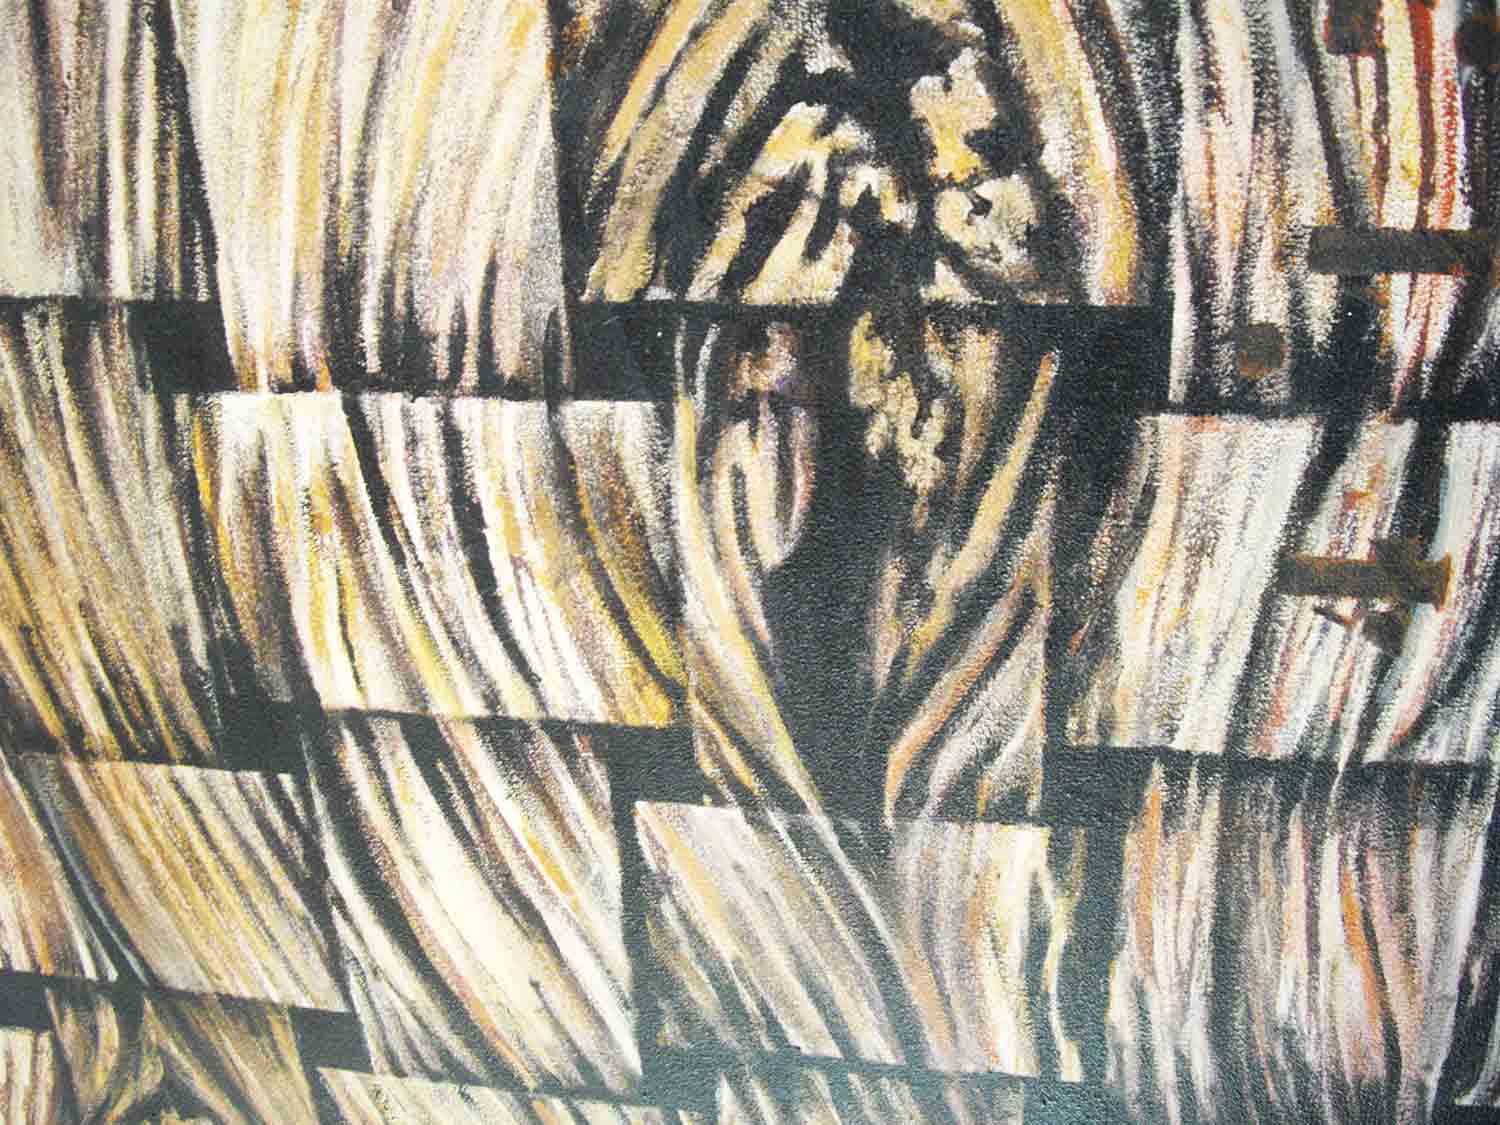 Woven wood I (detail)